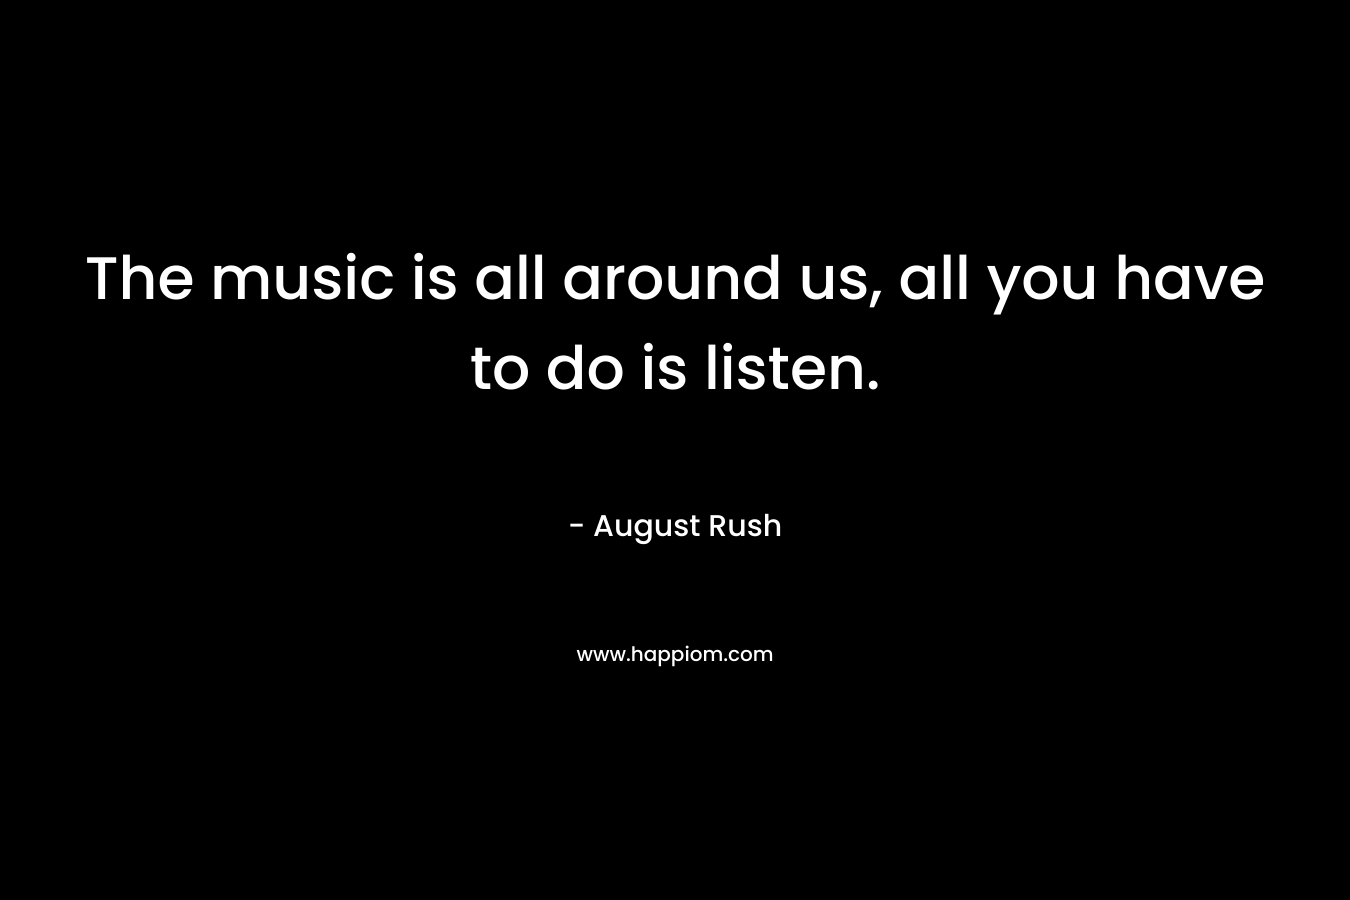 The music is all around us, all you have to do is listen. – August Rush